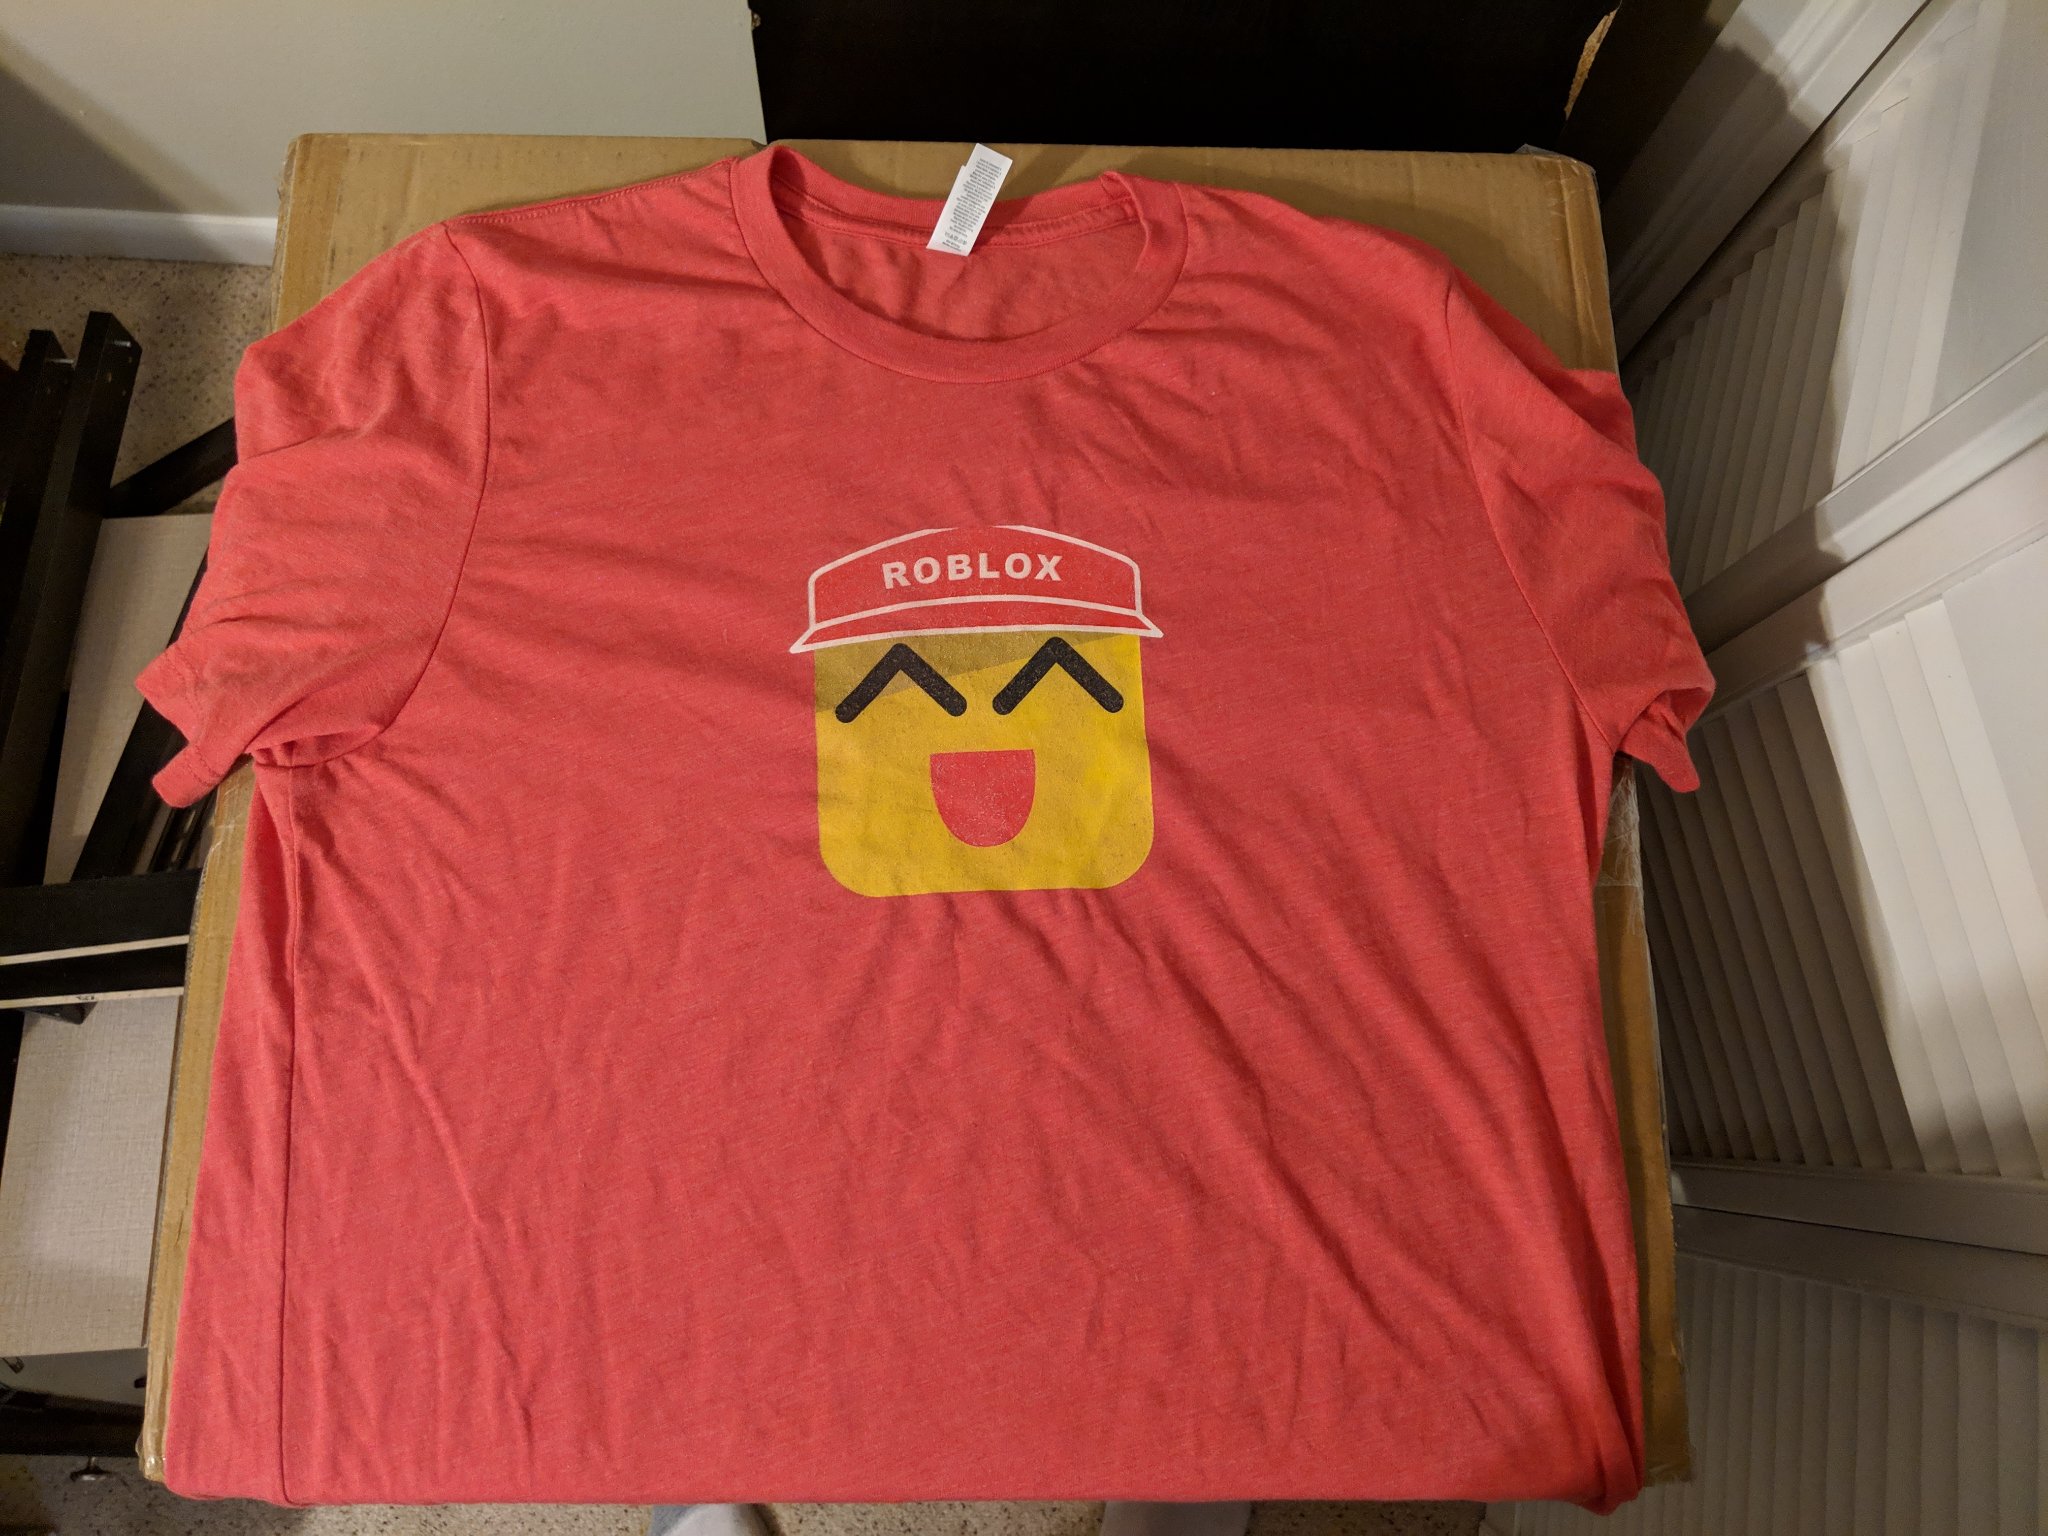 Dued1 On Twitter My Brother And His Friend Made Me This - fufu shirt ii roblox